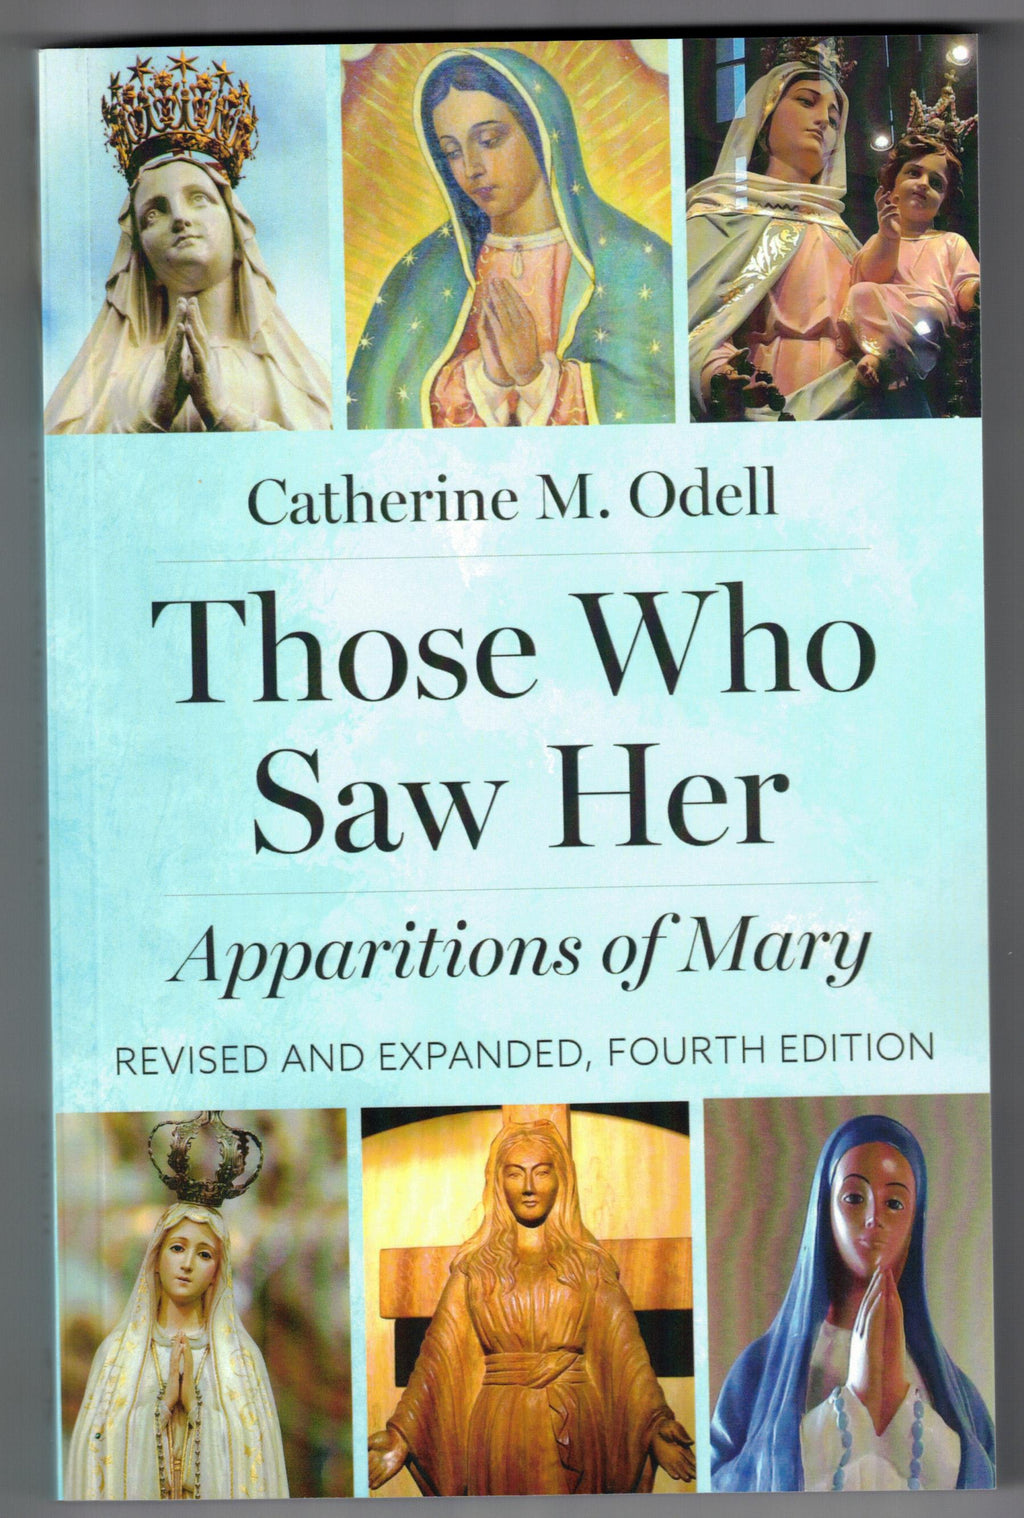 THOSE WHO SAW HER 4TH EDITION